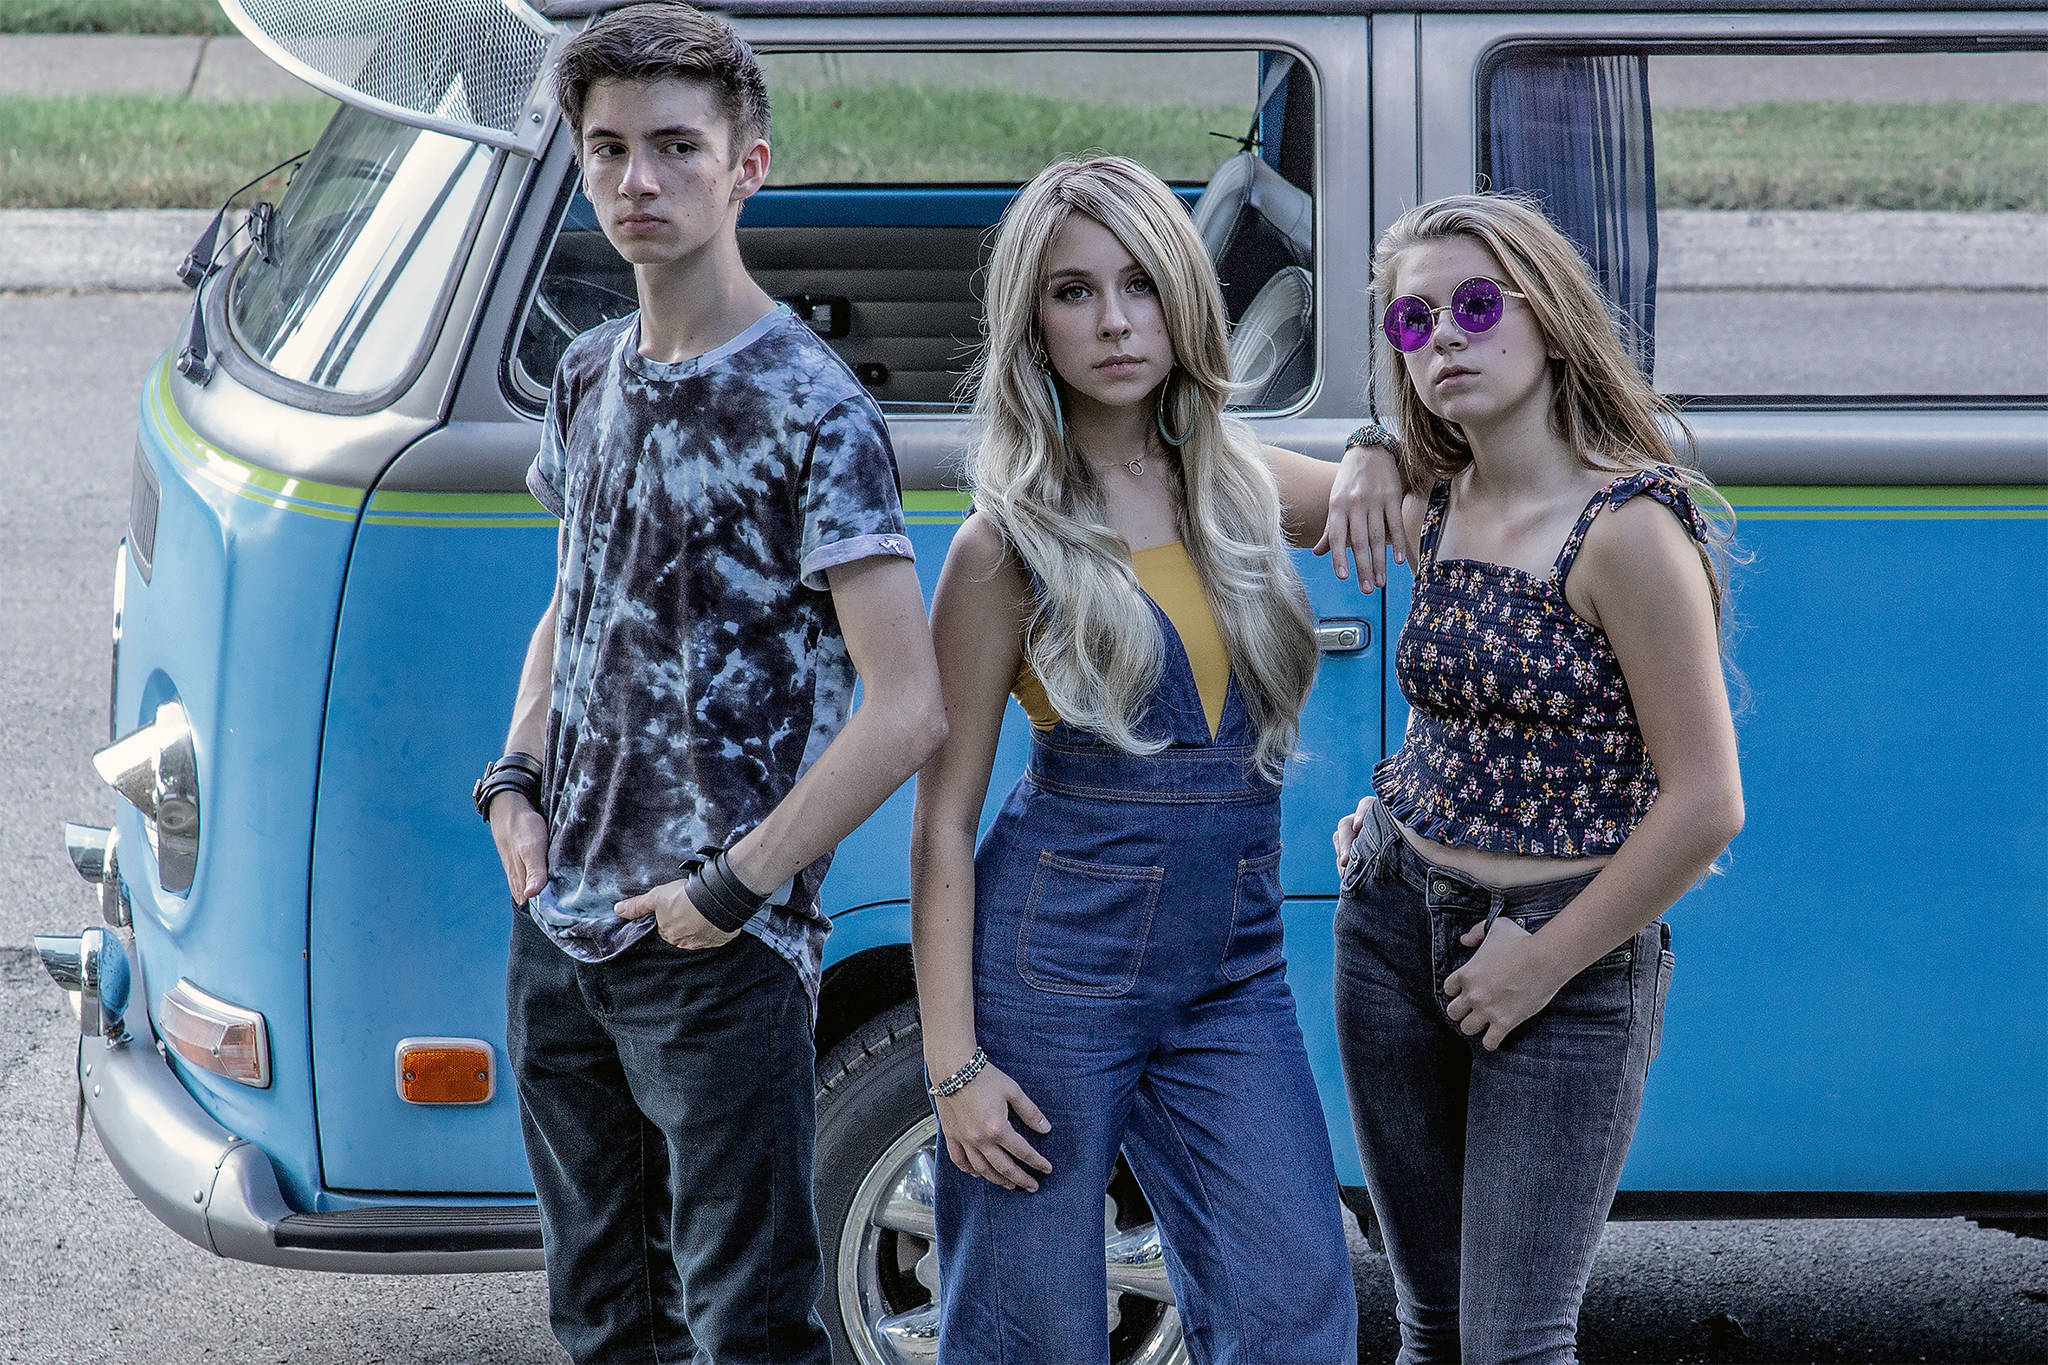 Graceman, a band of former Juneauites, will play Friday night at the Juneau Arts & Culture Centerl for Alaska Folk Festival. The band features, from left to right, Landon Graceman, 16; Anna Graceman, 19; and Allie Graceman, 14. (Courtesy Photo | Anna Graceman)